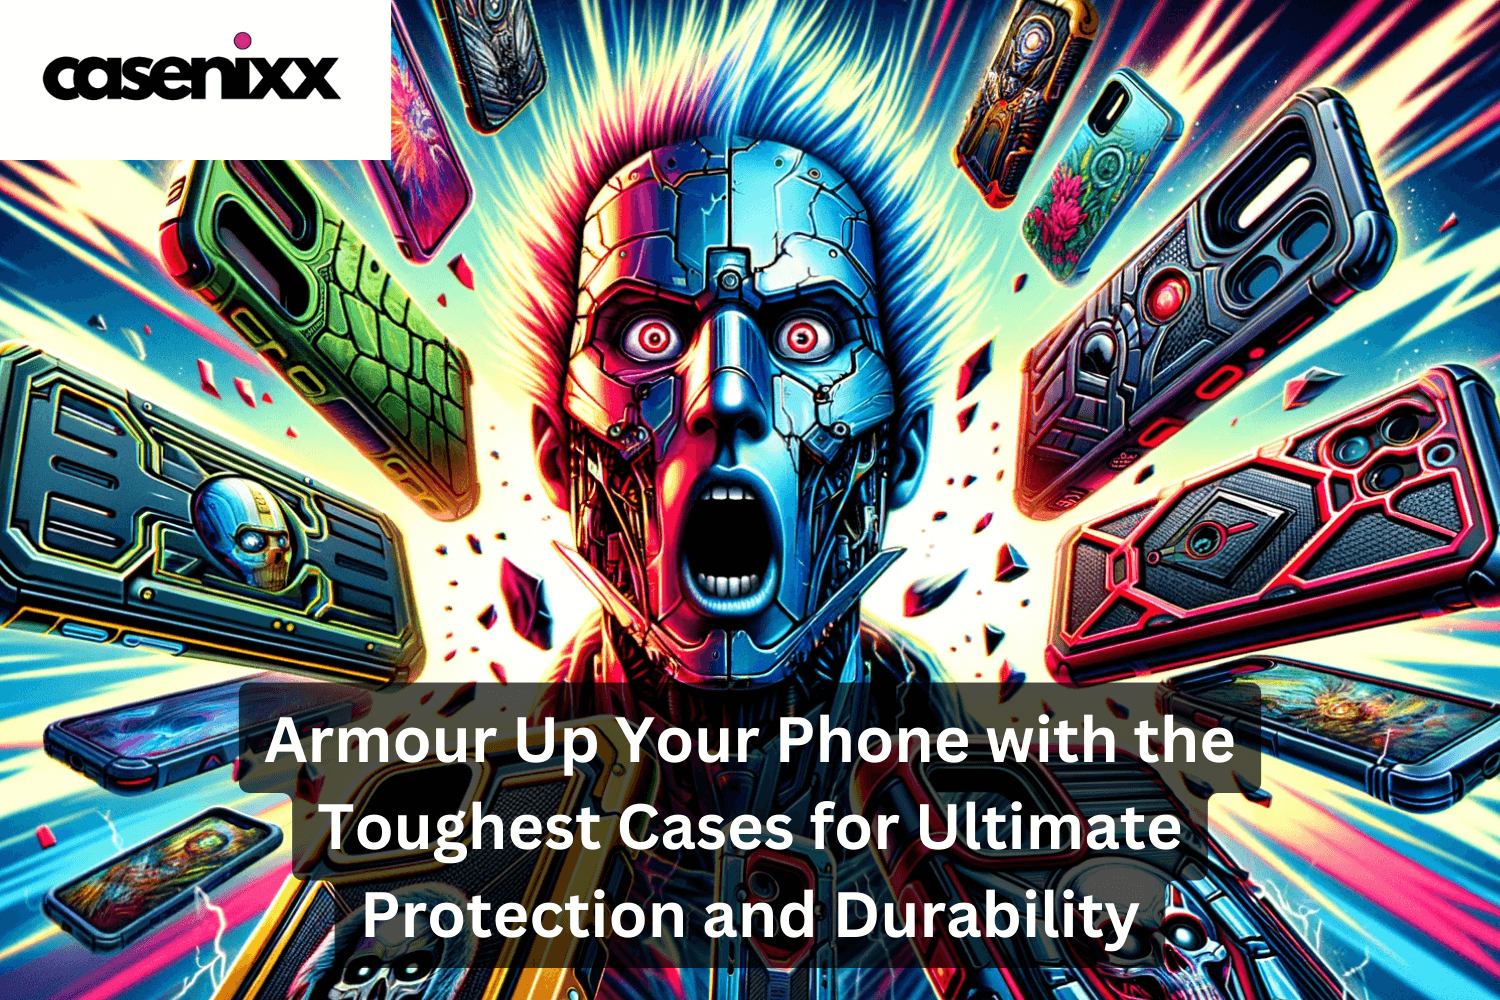 Armour Up Your Phone with the Toughest Cases for Ultimate Protection and Durability